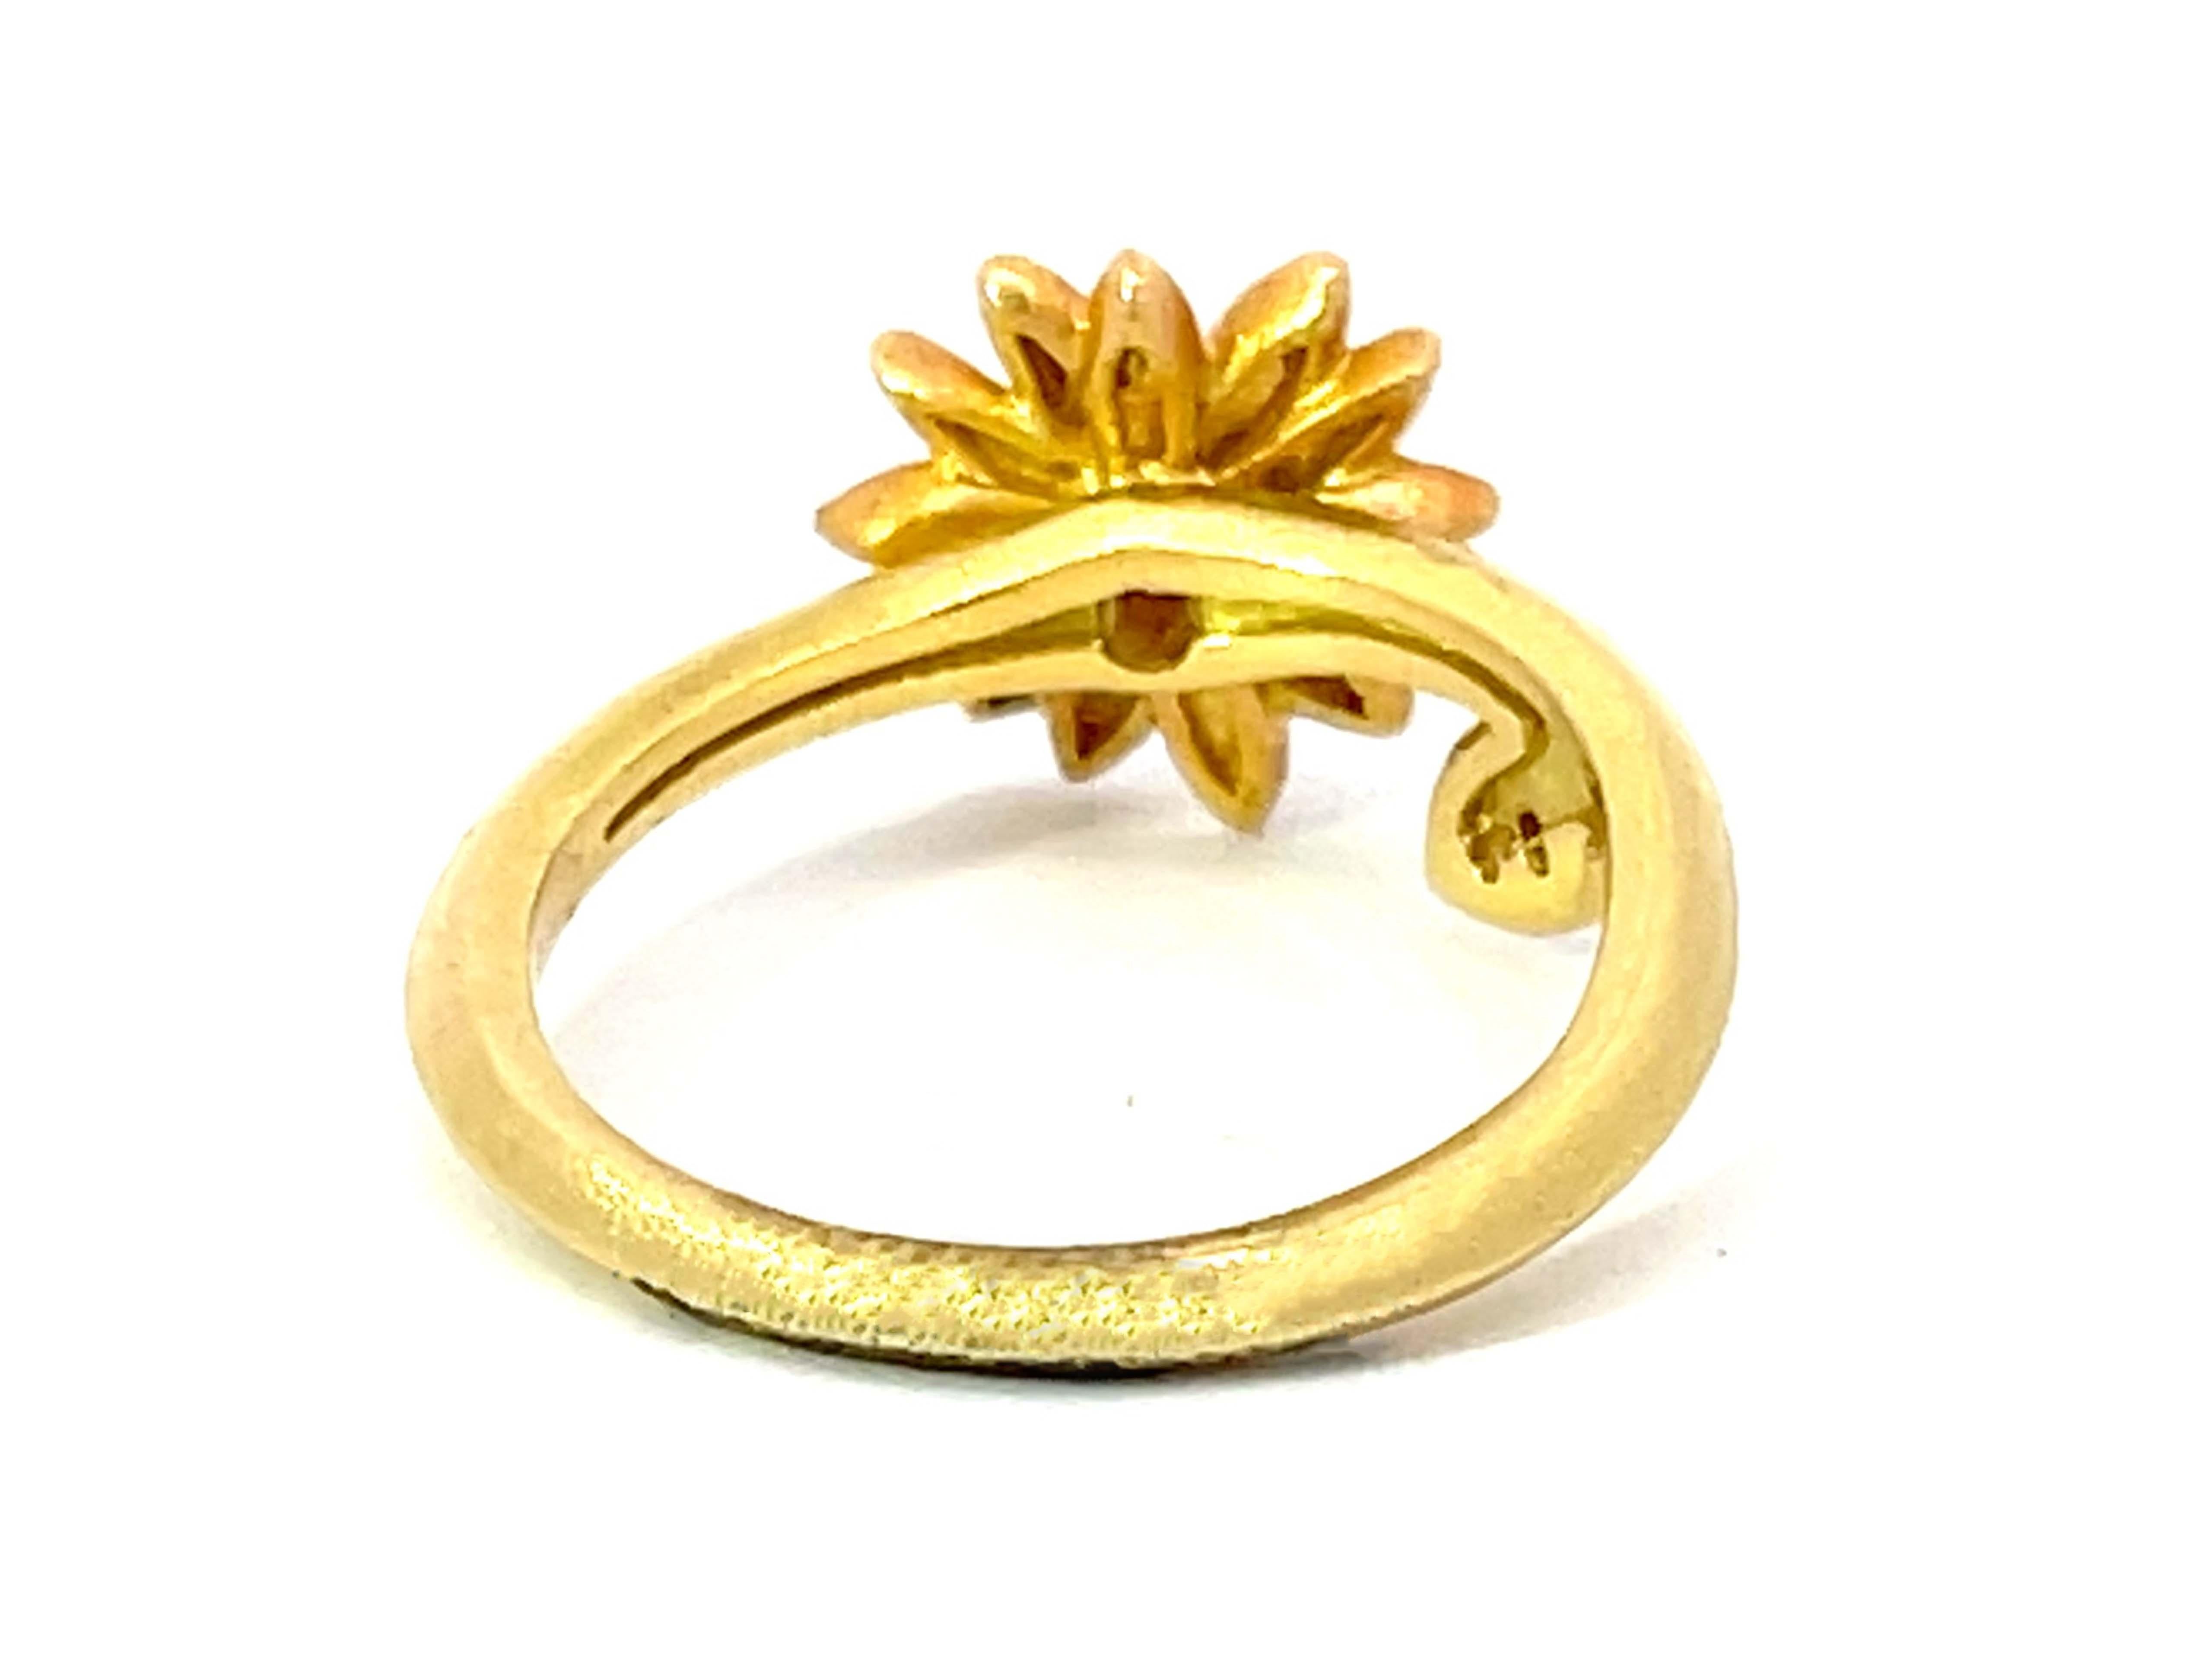 Diamond Daisy Flower Matte Ring in 18k Yellow Gold In Excellent Condition For Sale In Honolulu, HI